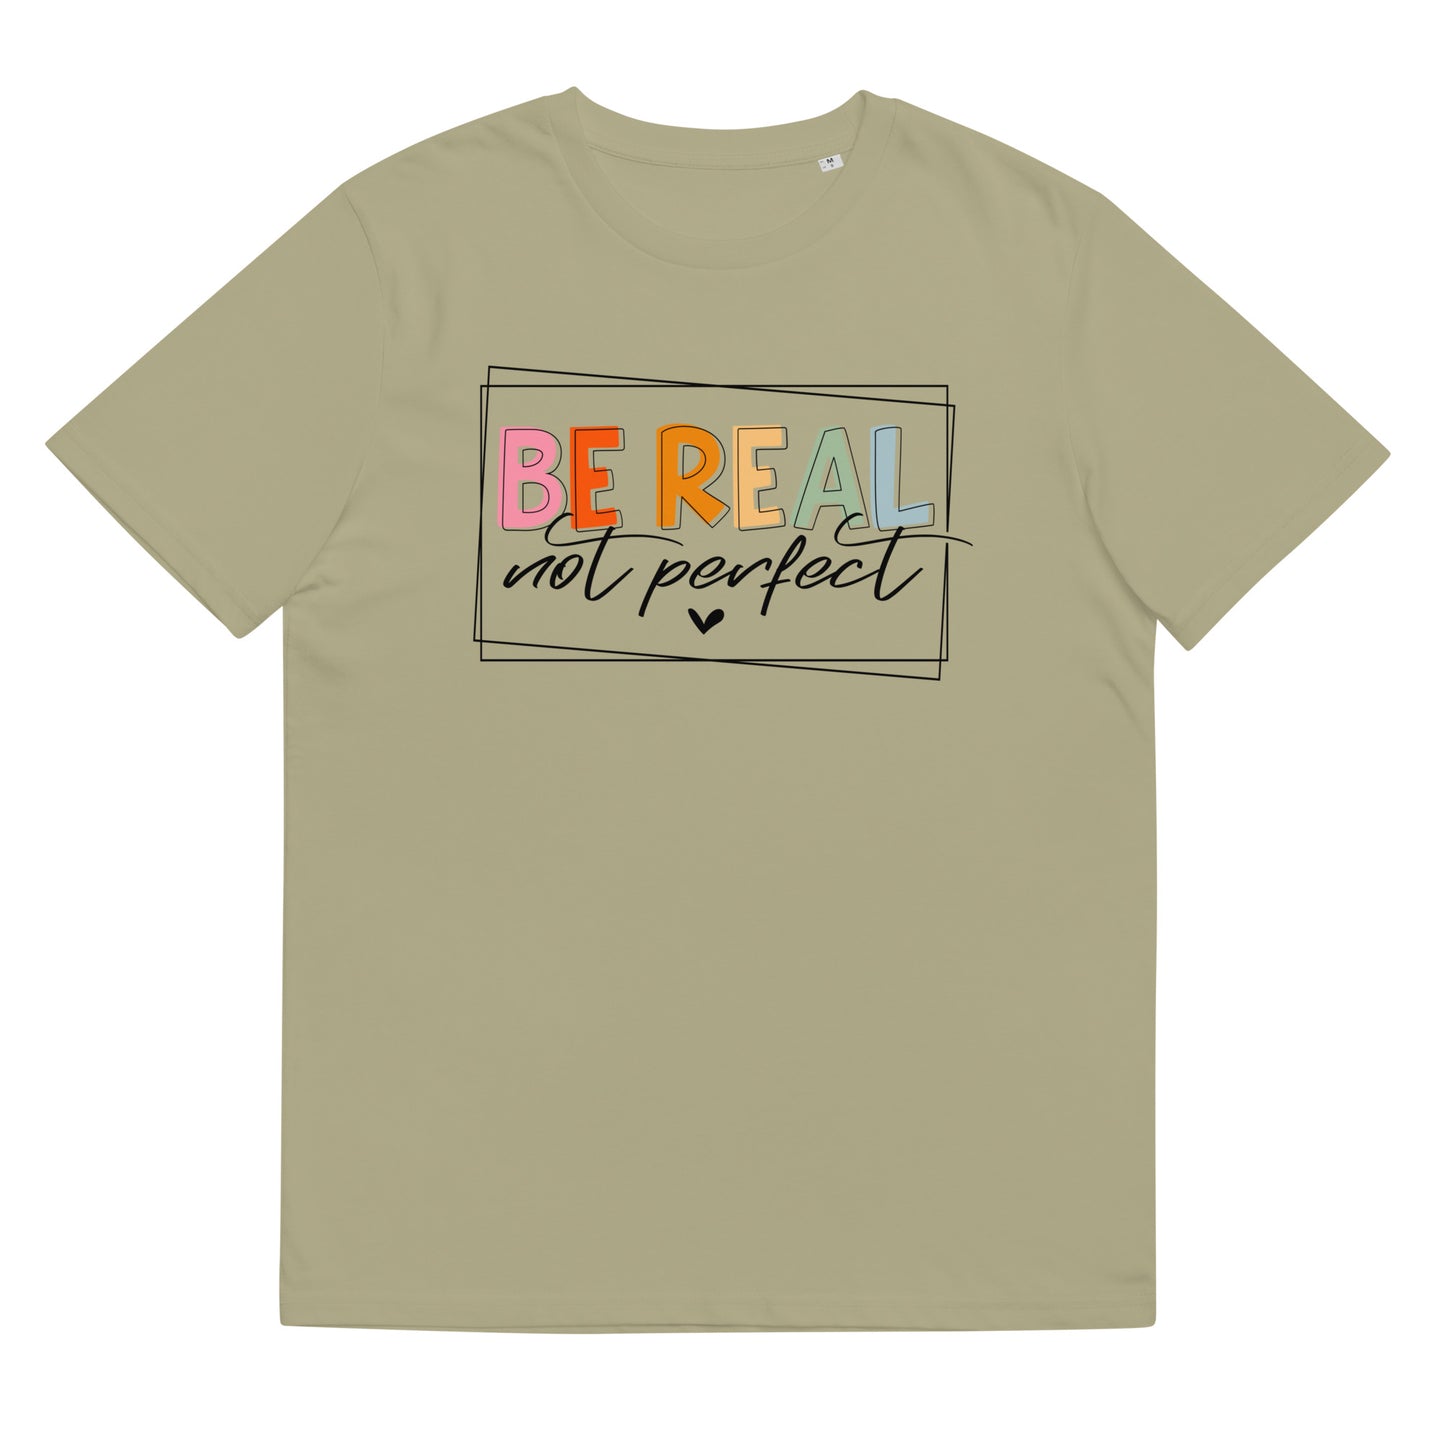 Organic cotton unisex t-shirt: "Be real, not perfect"